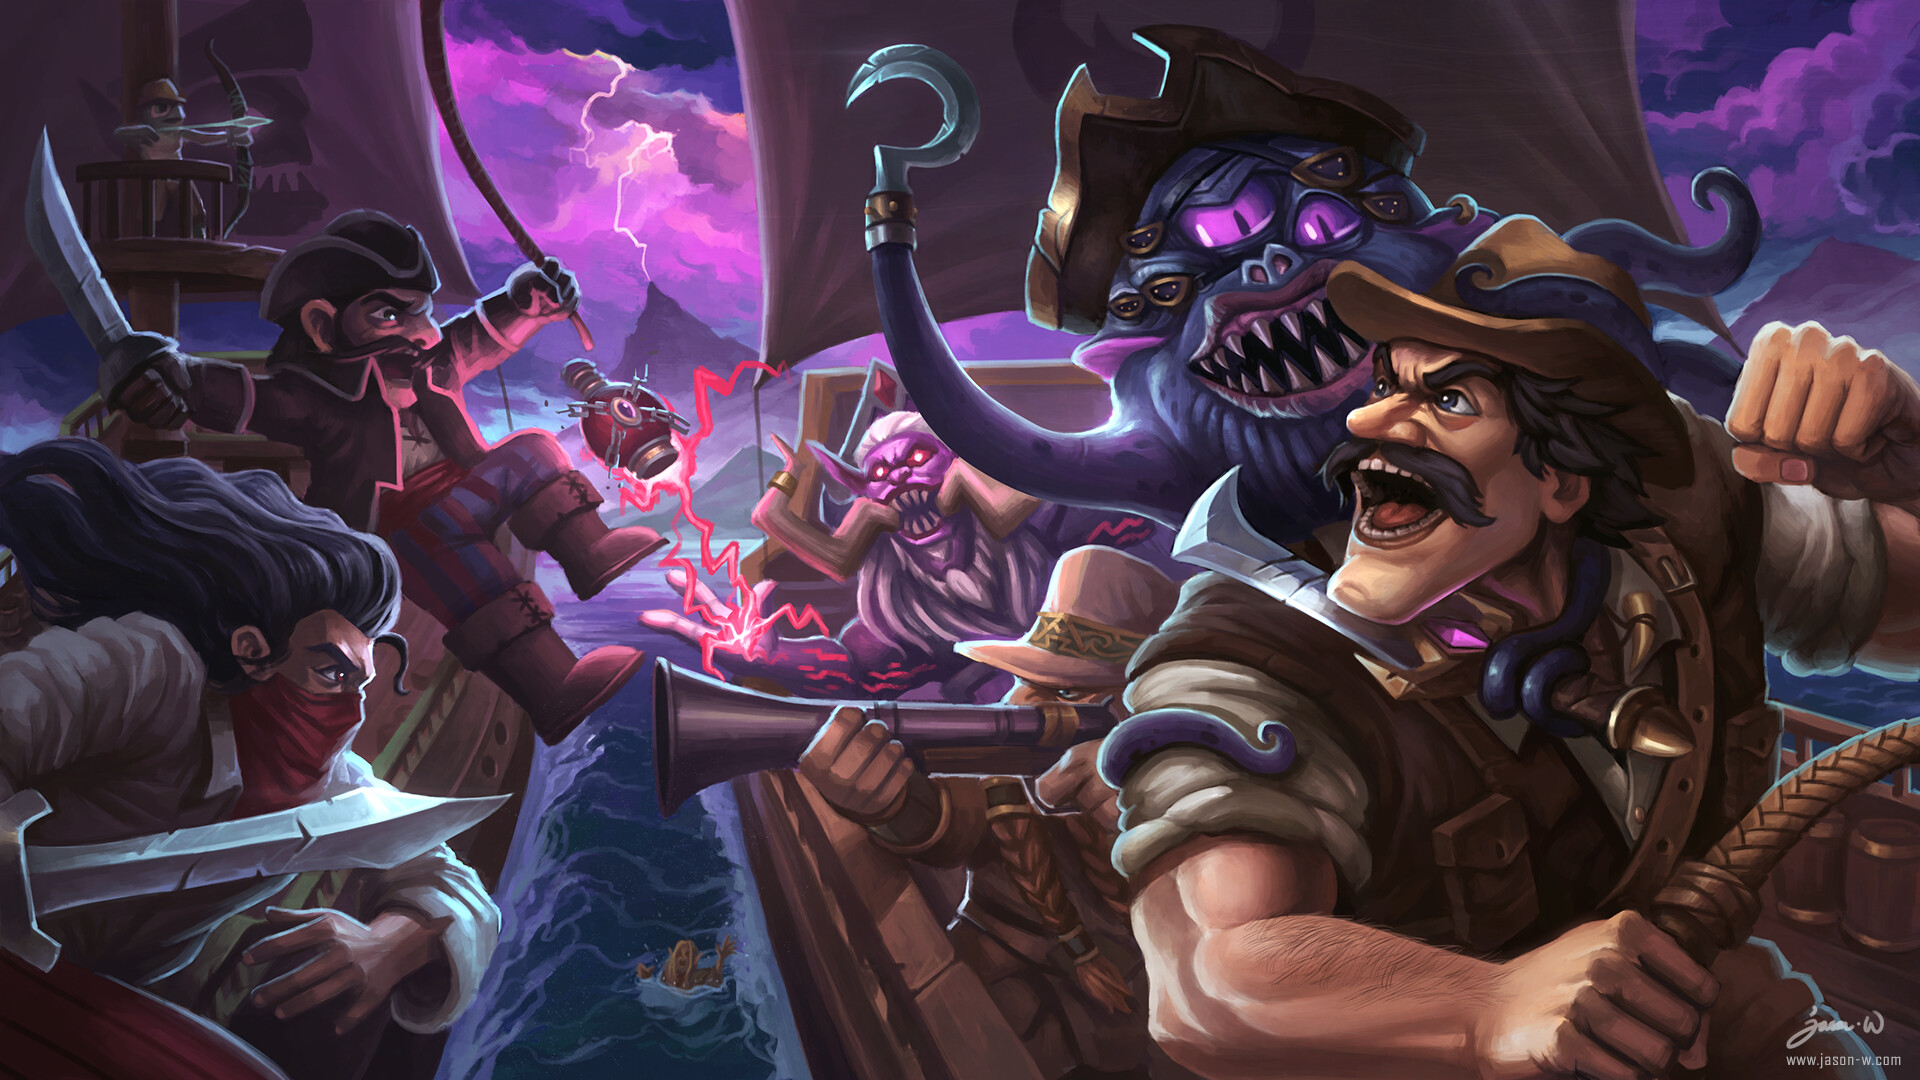 Hearthstone: It was among the yearly top 10 most viewed games on Twitch for five years after launch, A free-to-play video game. 1920x1080 Full HD Background.